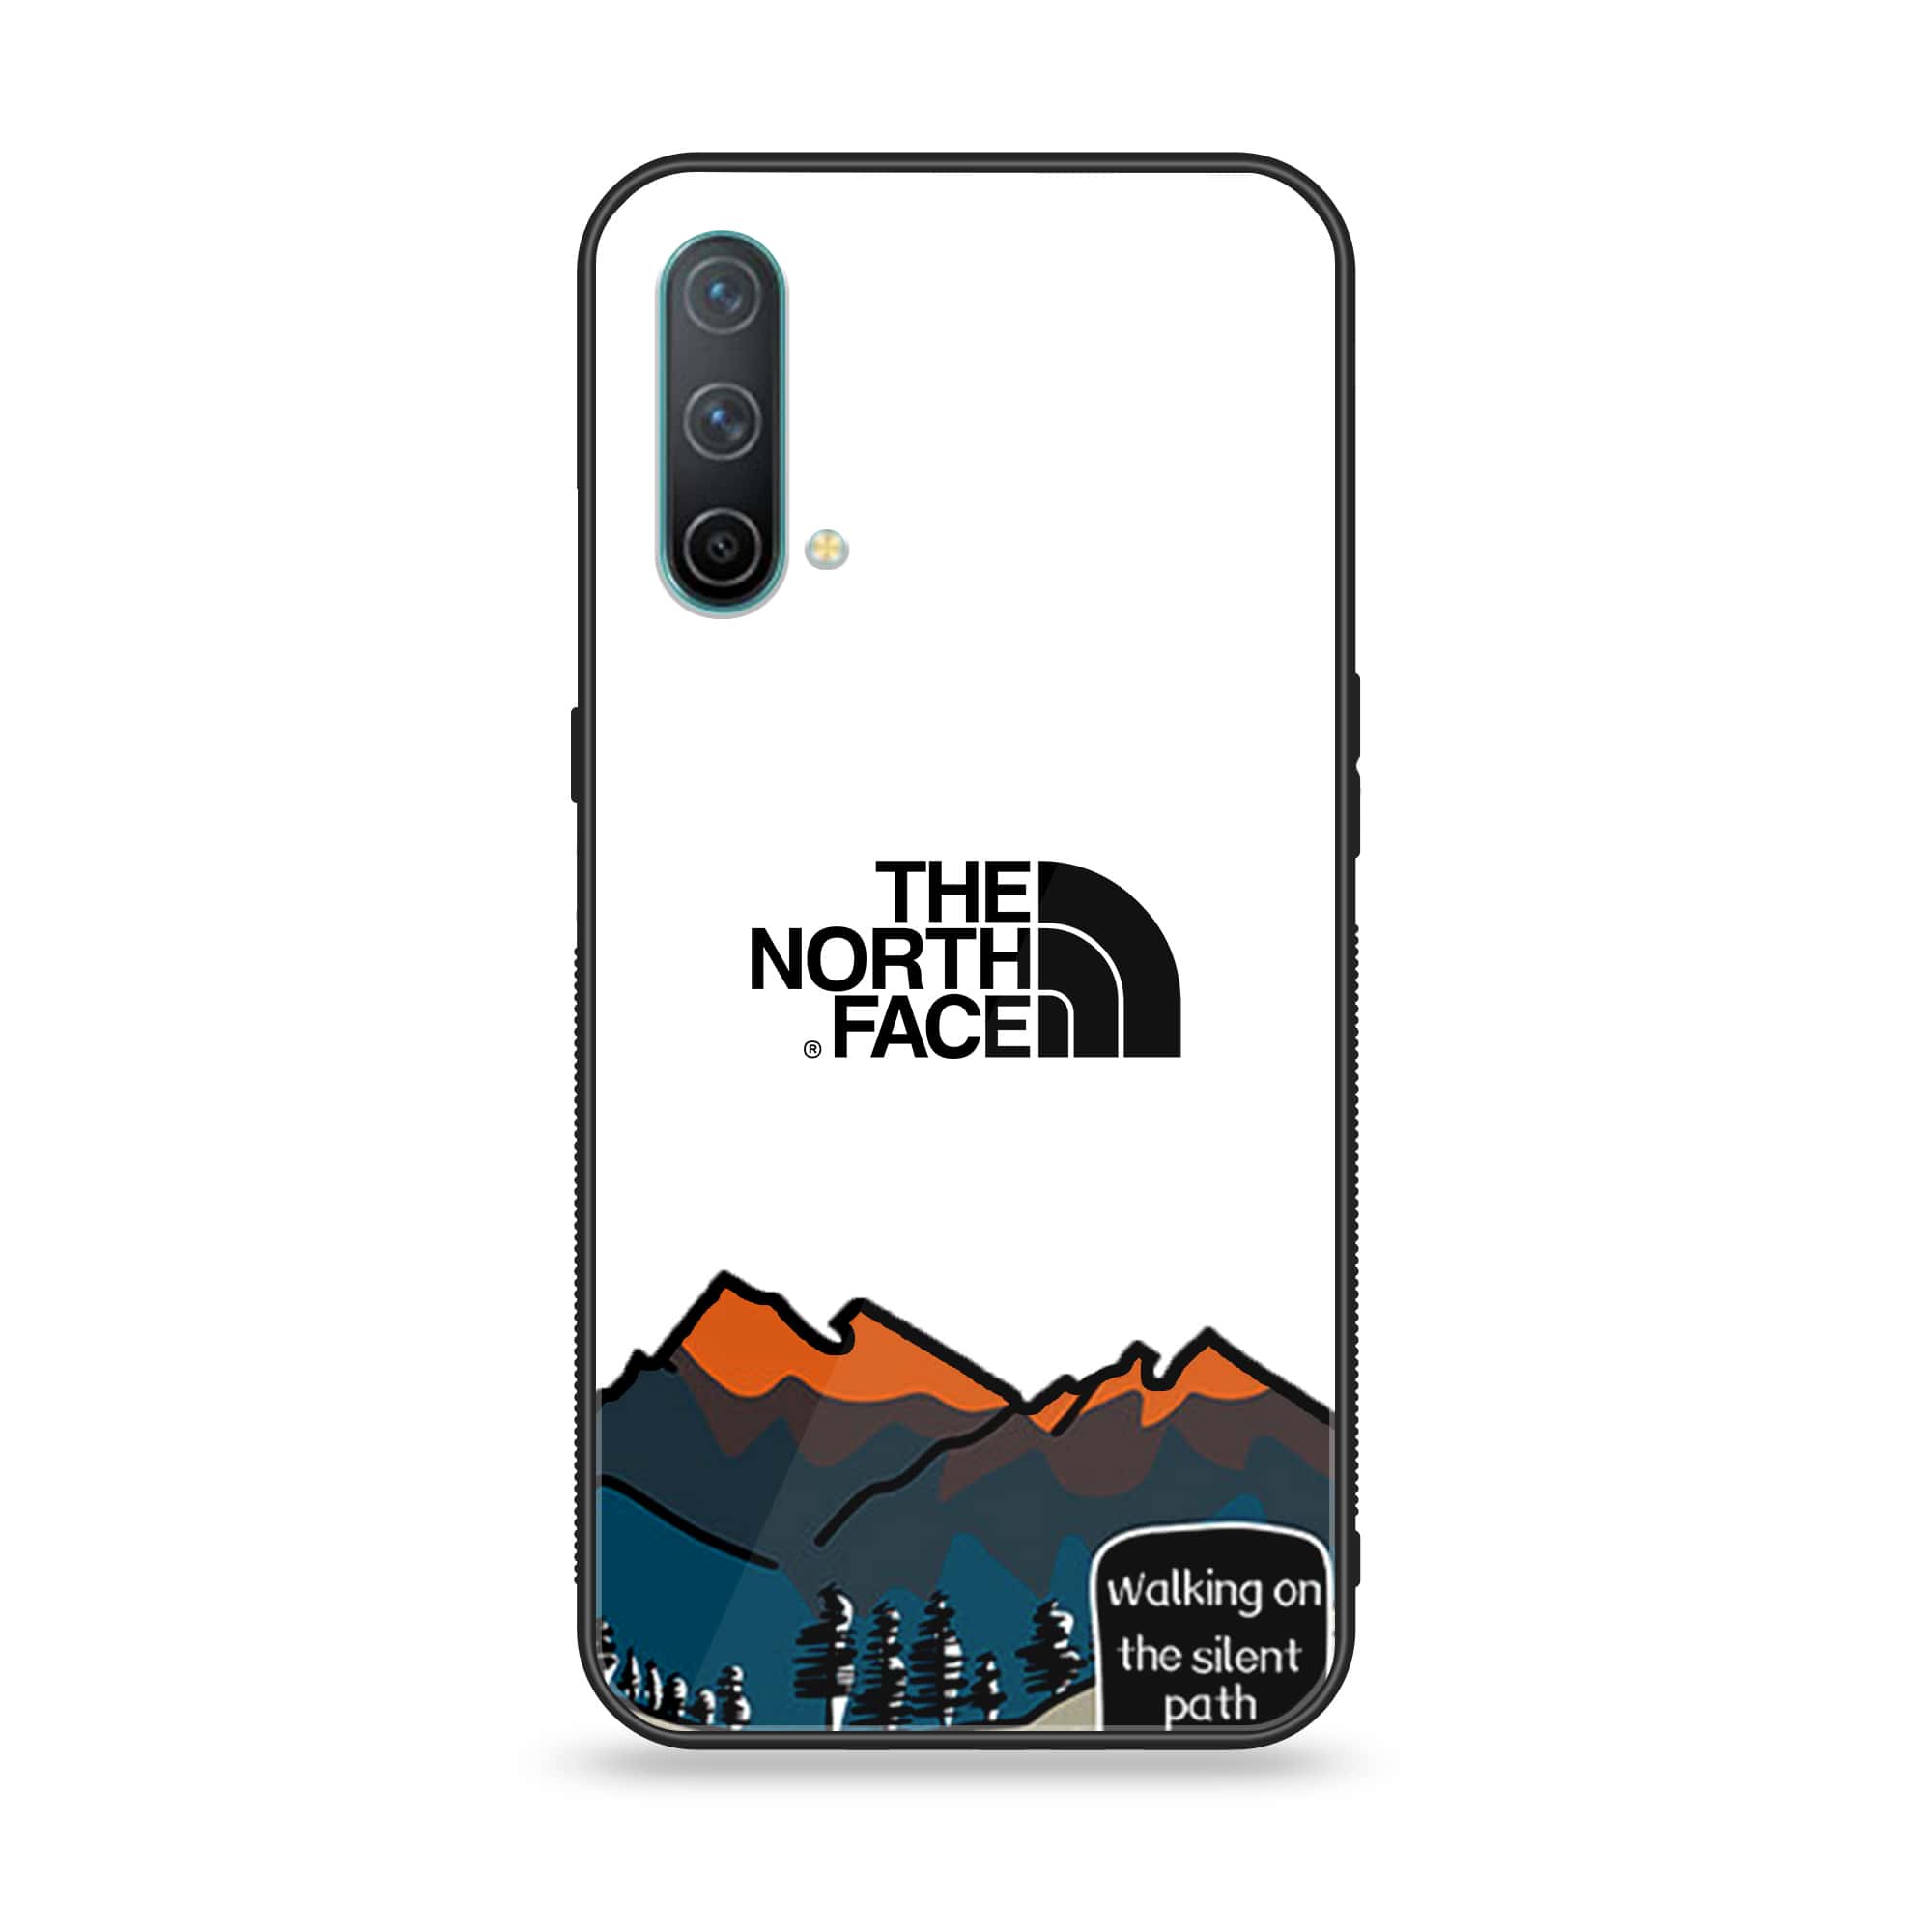 OnePlus Nord CE 5G - The North Face Series - Premium Printed Glass soft Bumper shock Proof Case